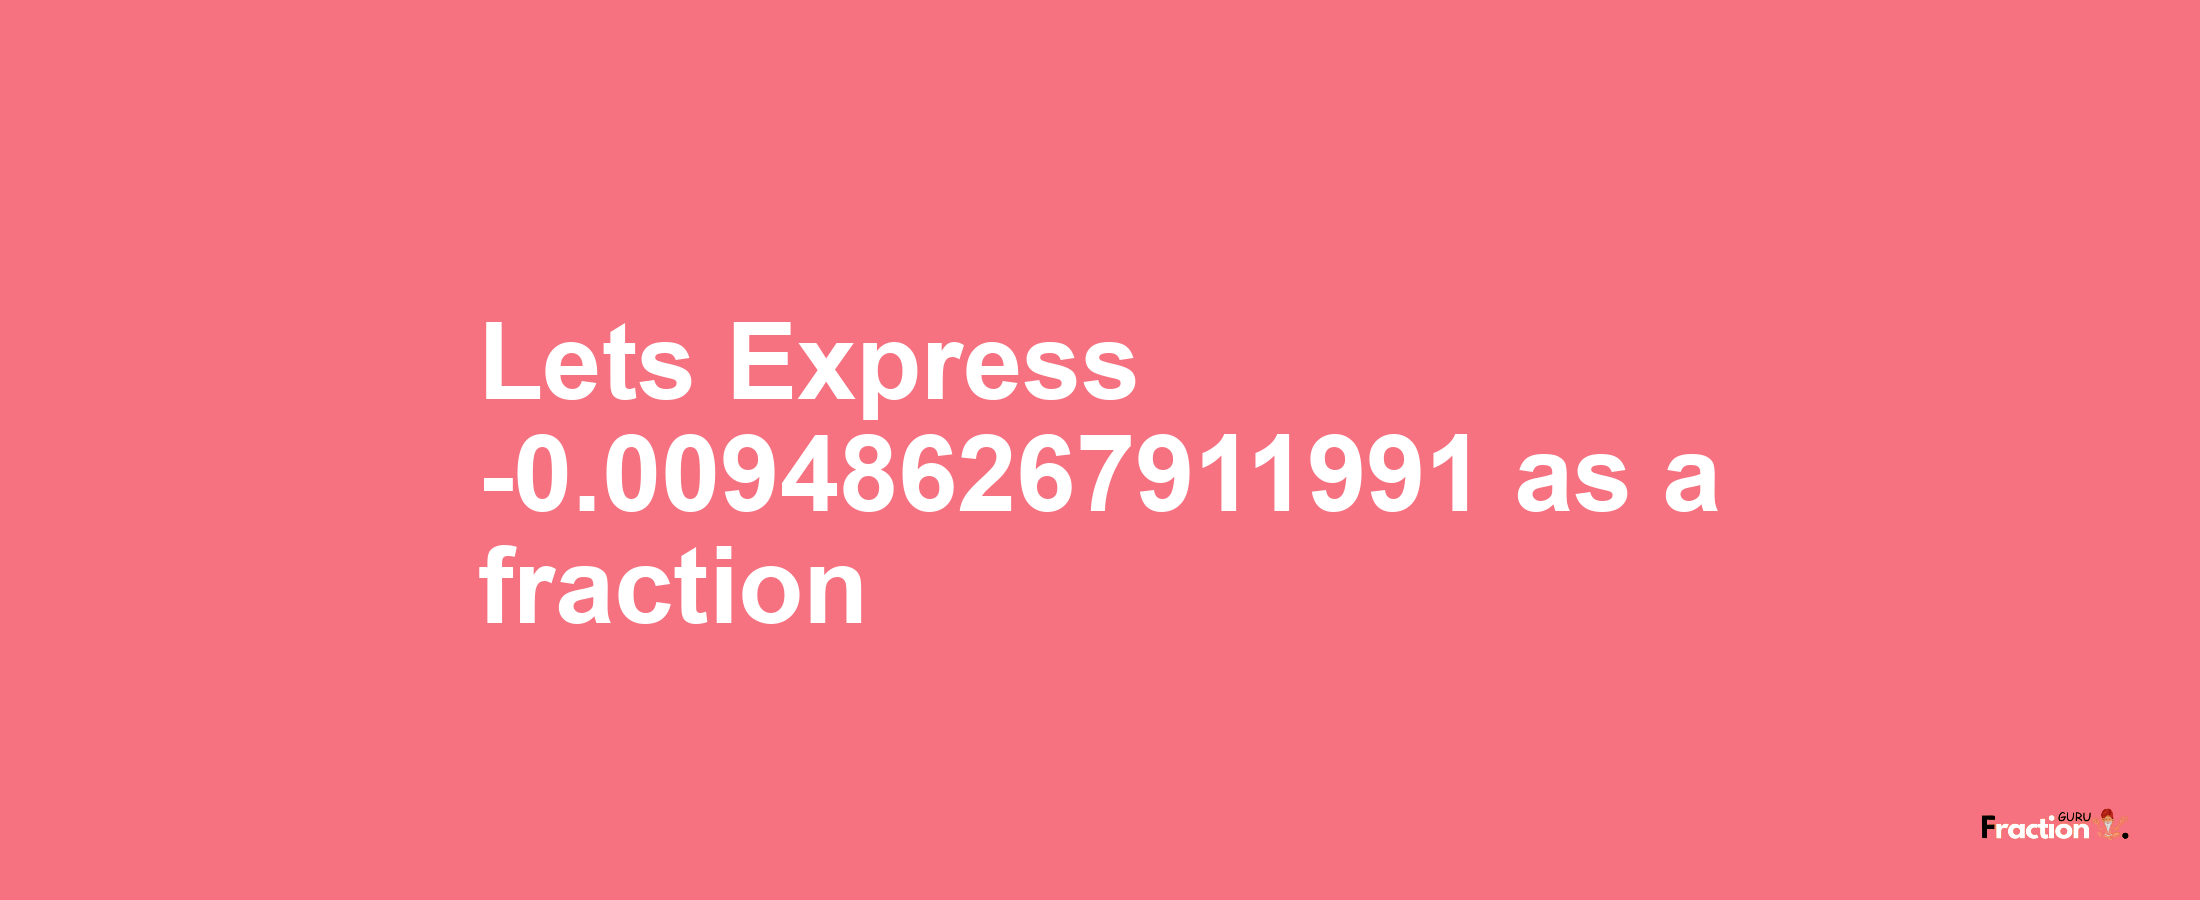 Lets Express -0.009486267911991 as afraction